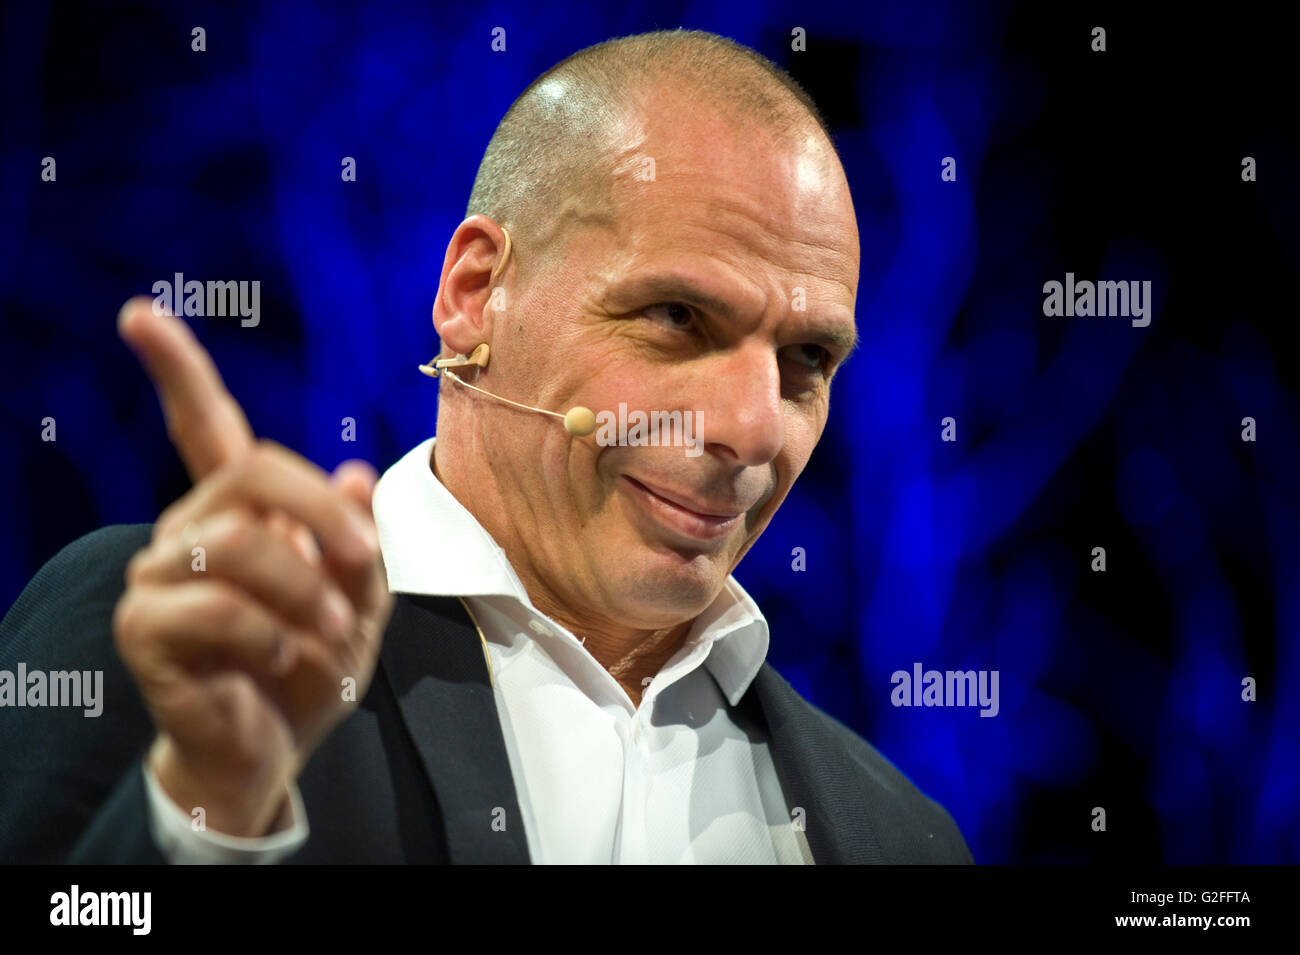 Yanis Varoufakis former finance minister of Greece speaking on stage at Hay Festival 2016 Stock Photo